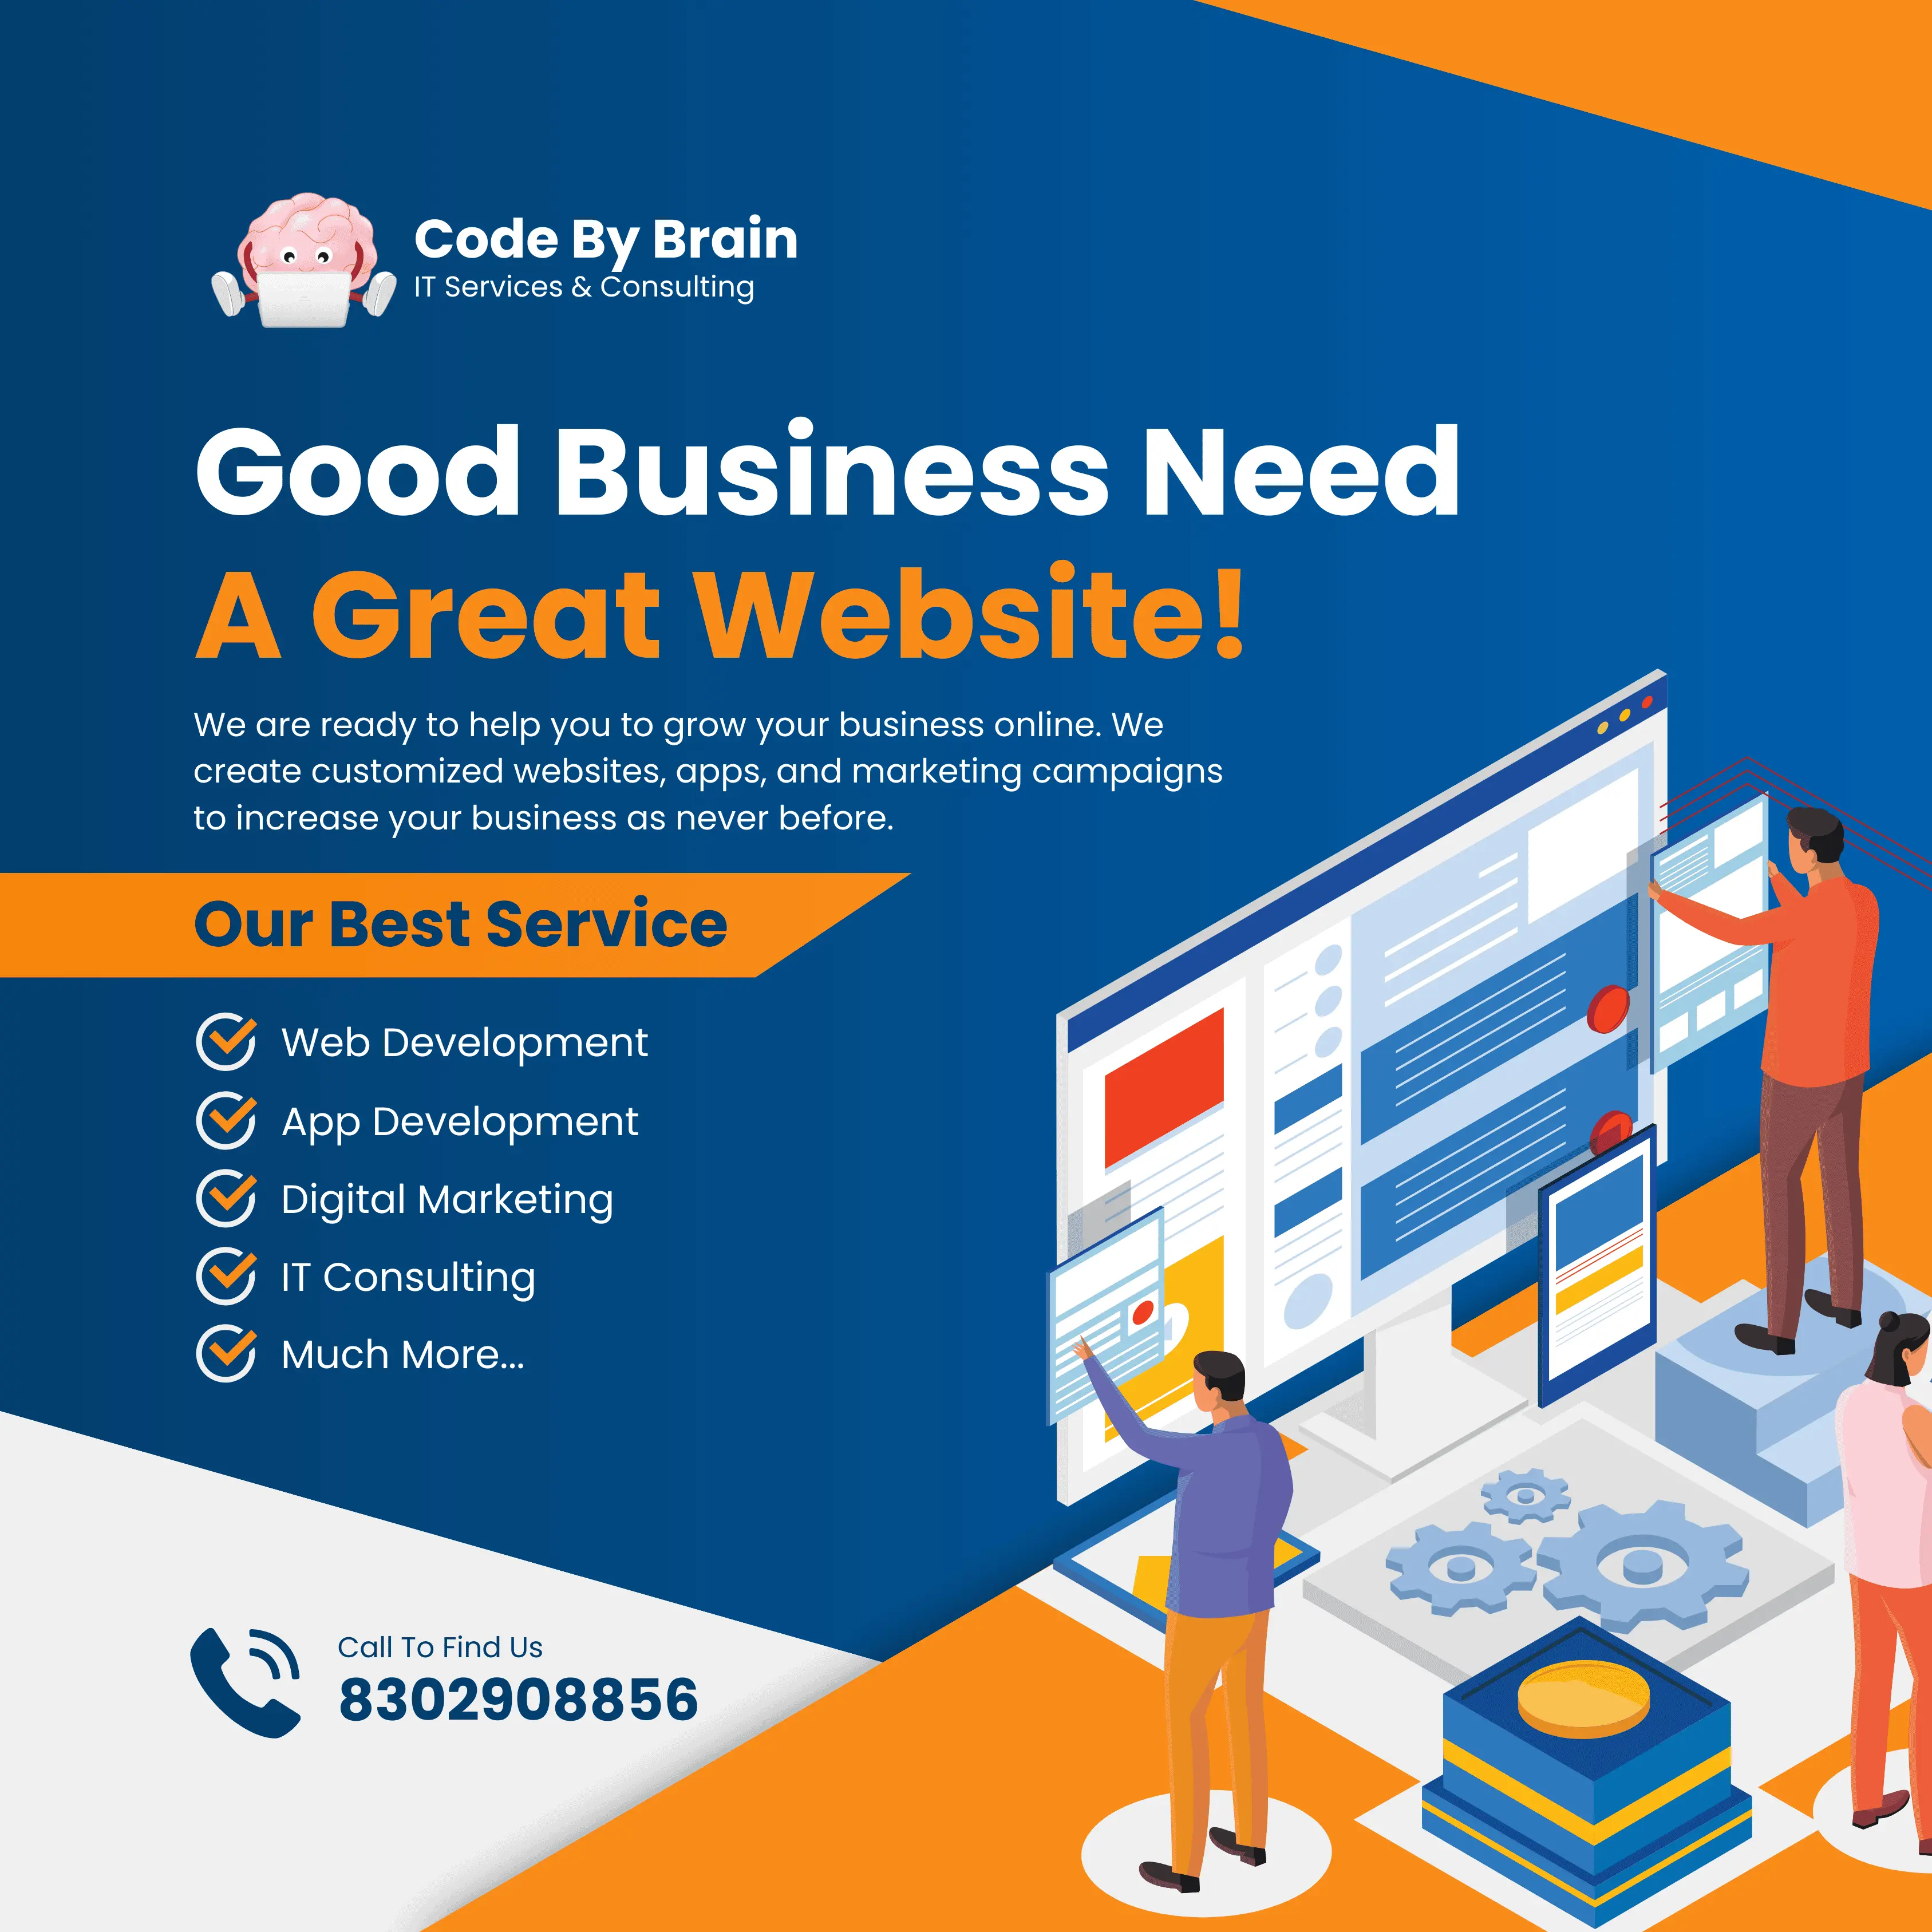 Get Best IT Solutions With Code By Brain